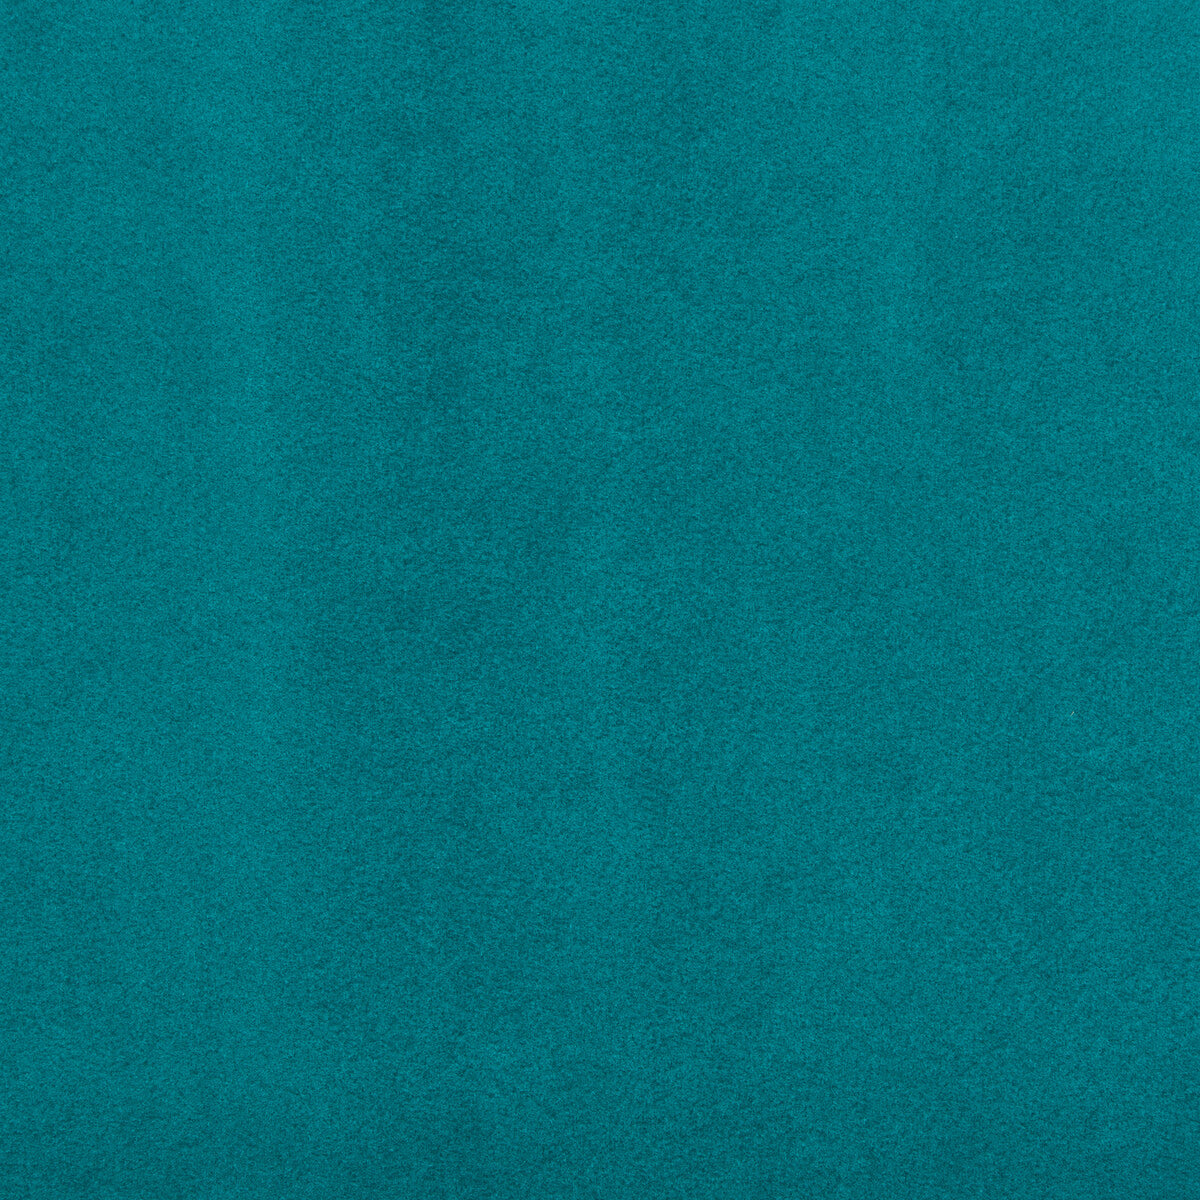 Ultrasuede Green fabric in turquoise color - pattern 30787.13.0 - by Kravet Design in the Performance collection